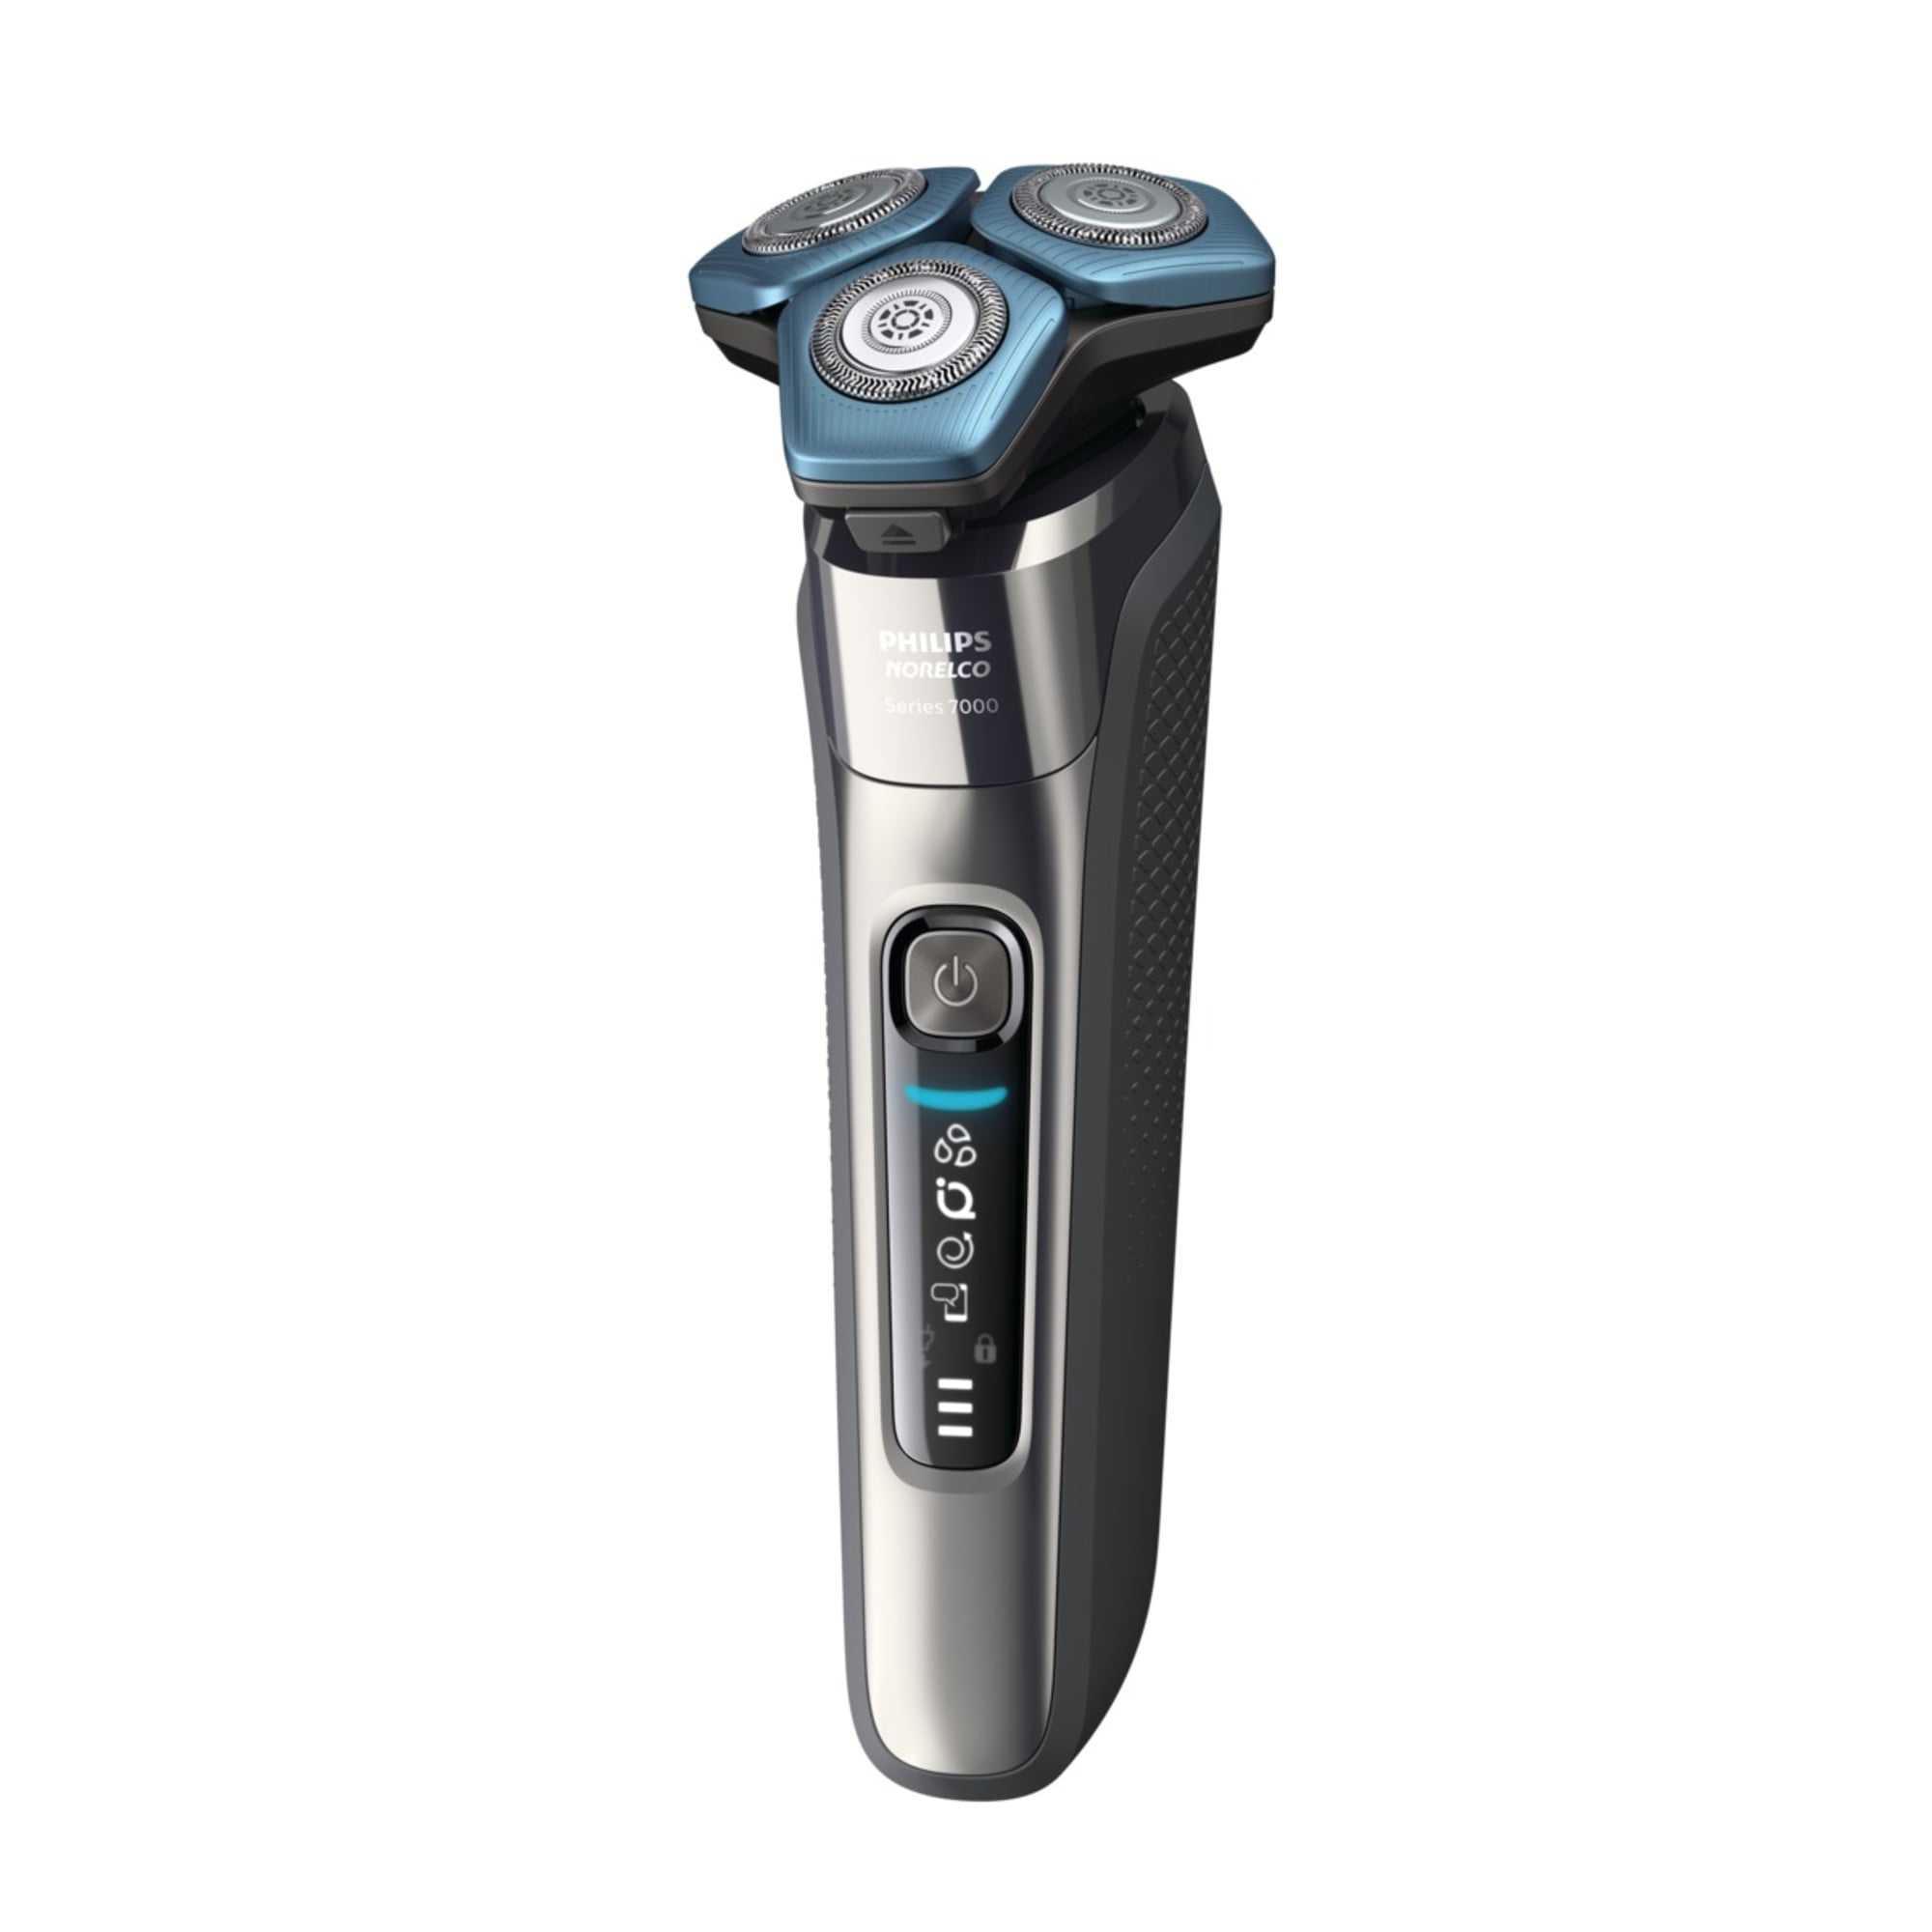 Philips Norelco 7100 Electric Shaver with Trimmer